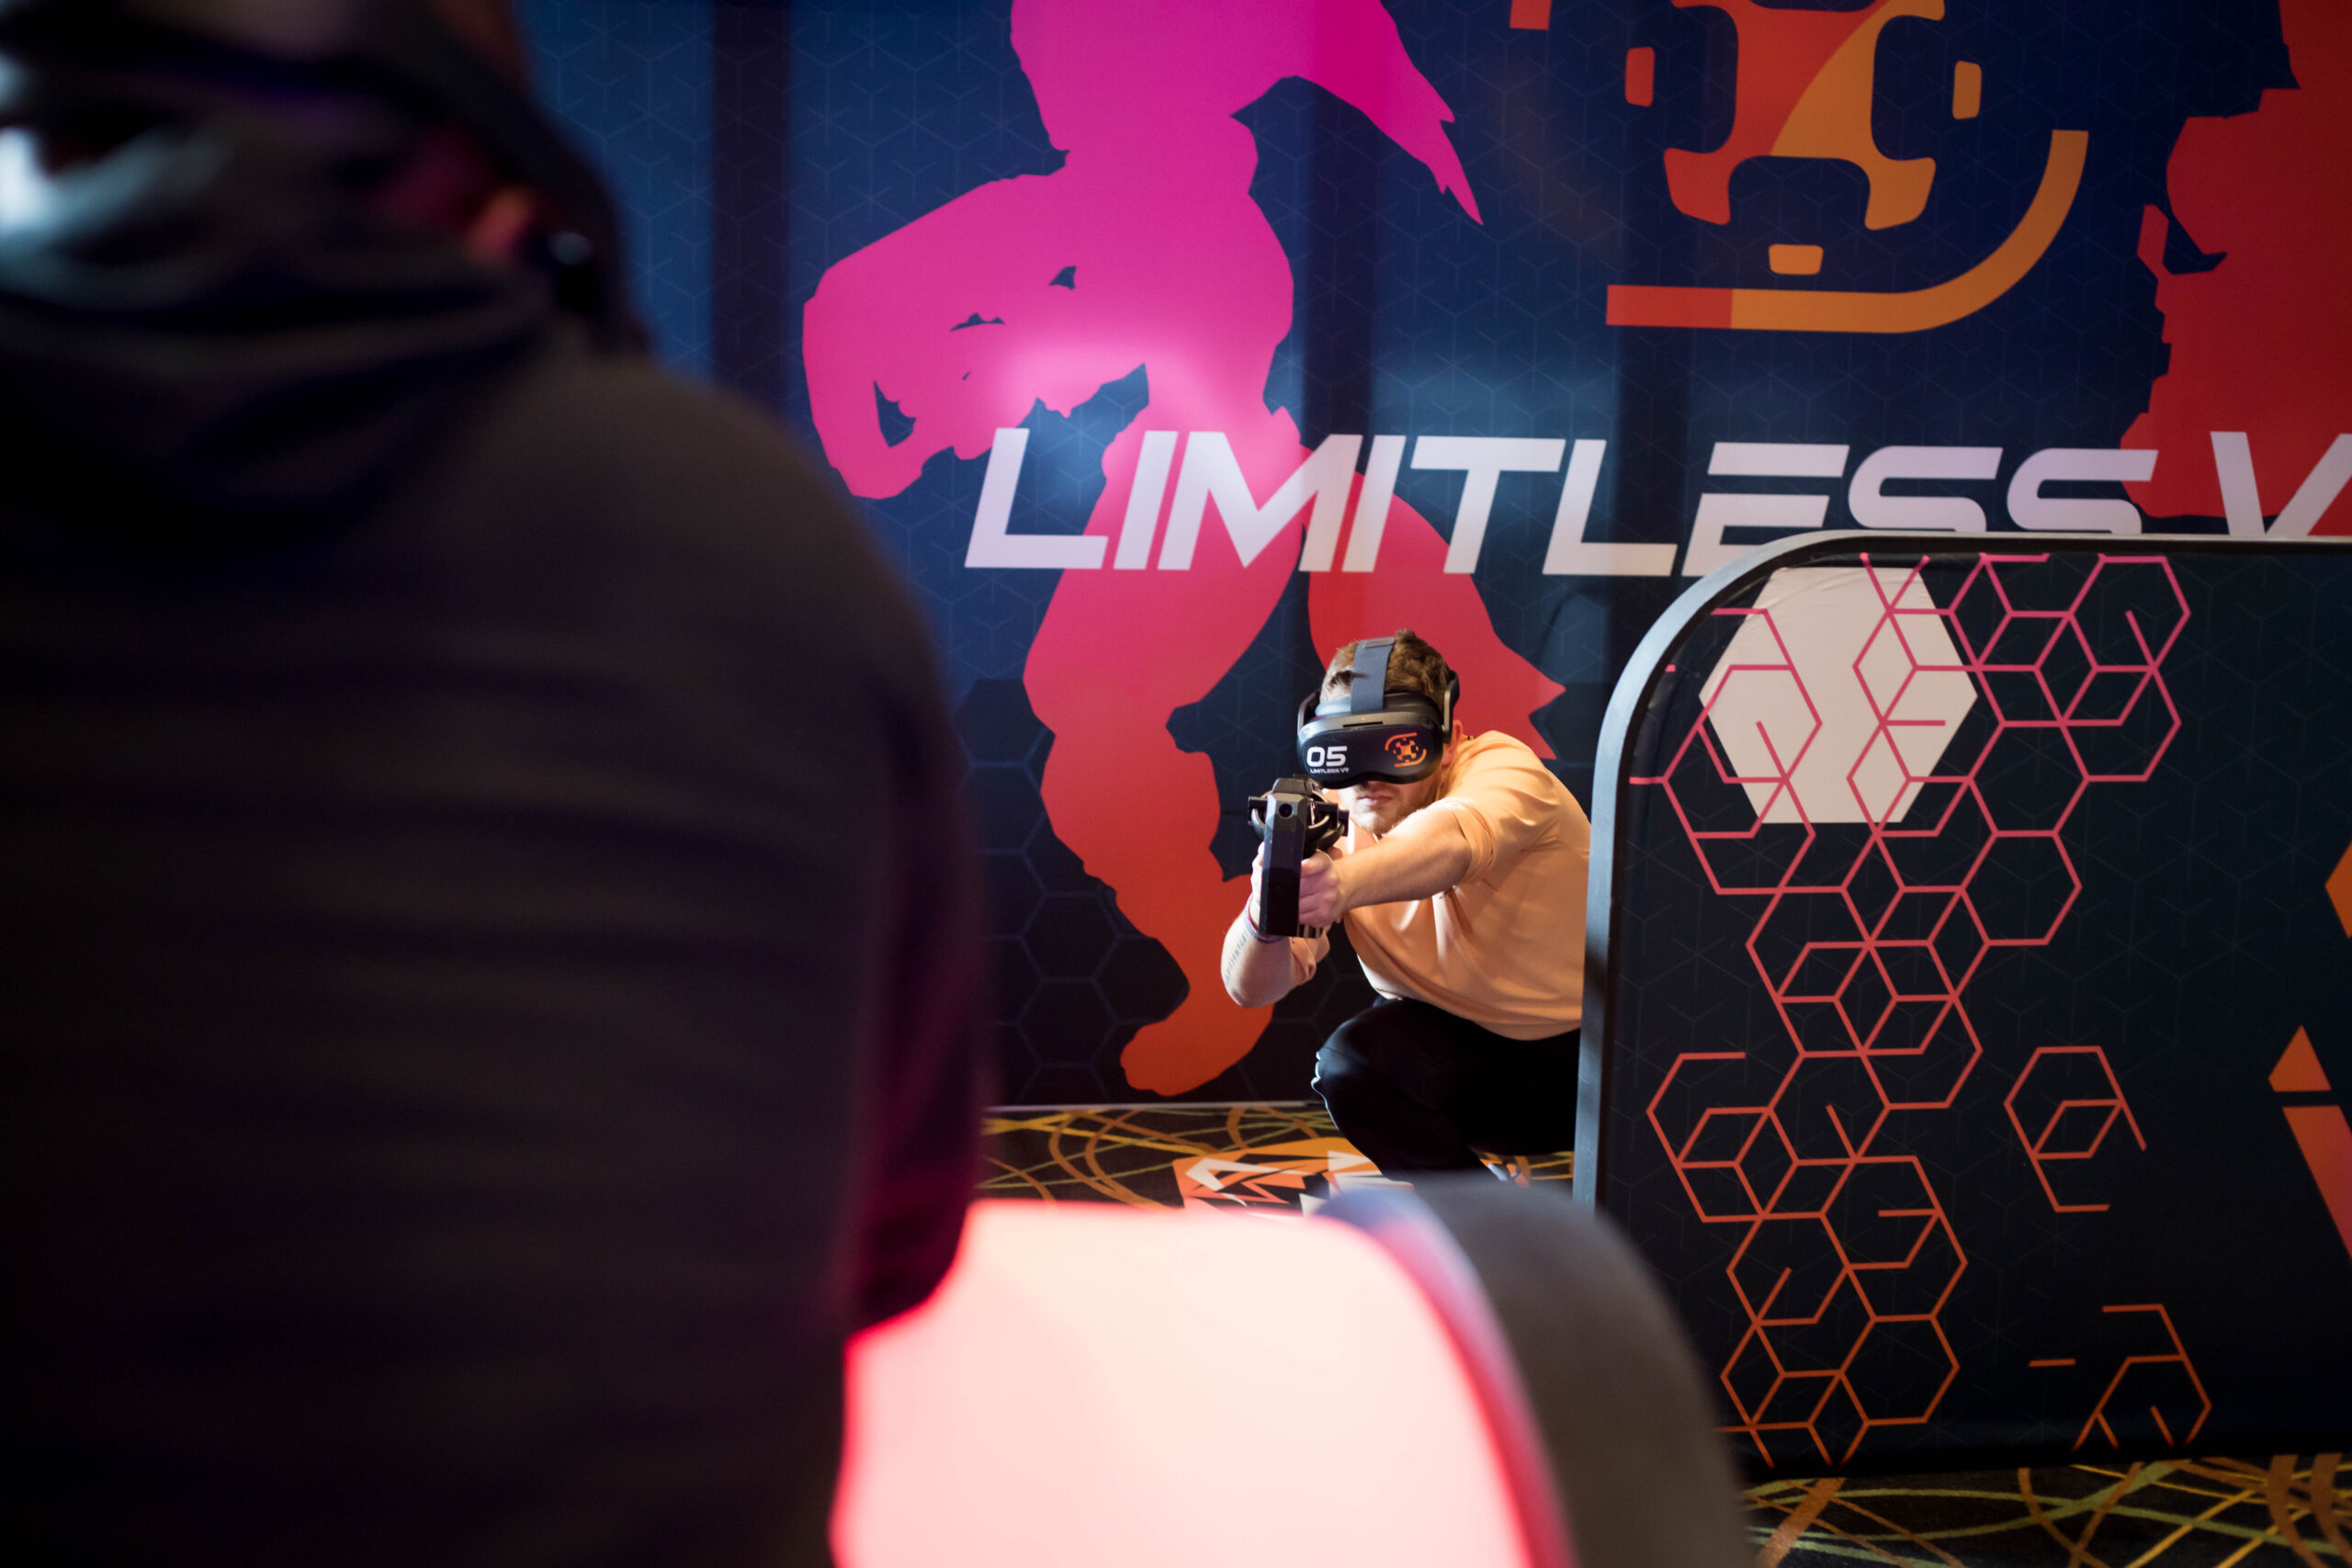 Limitless VR from Creative Works